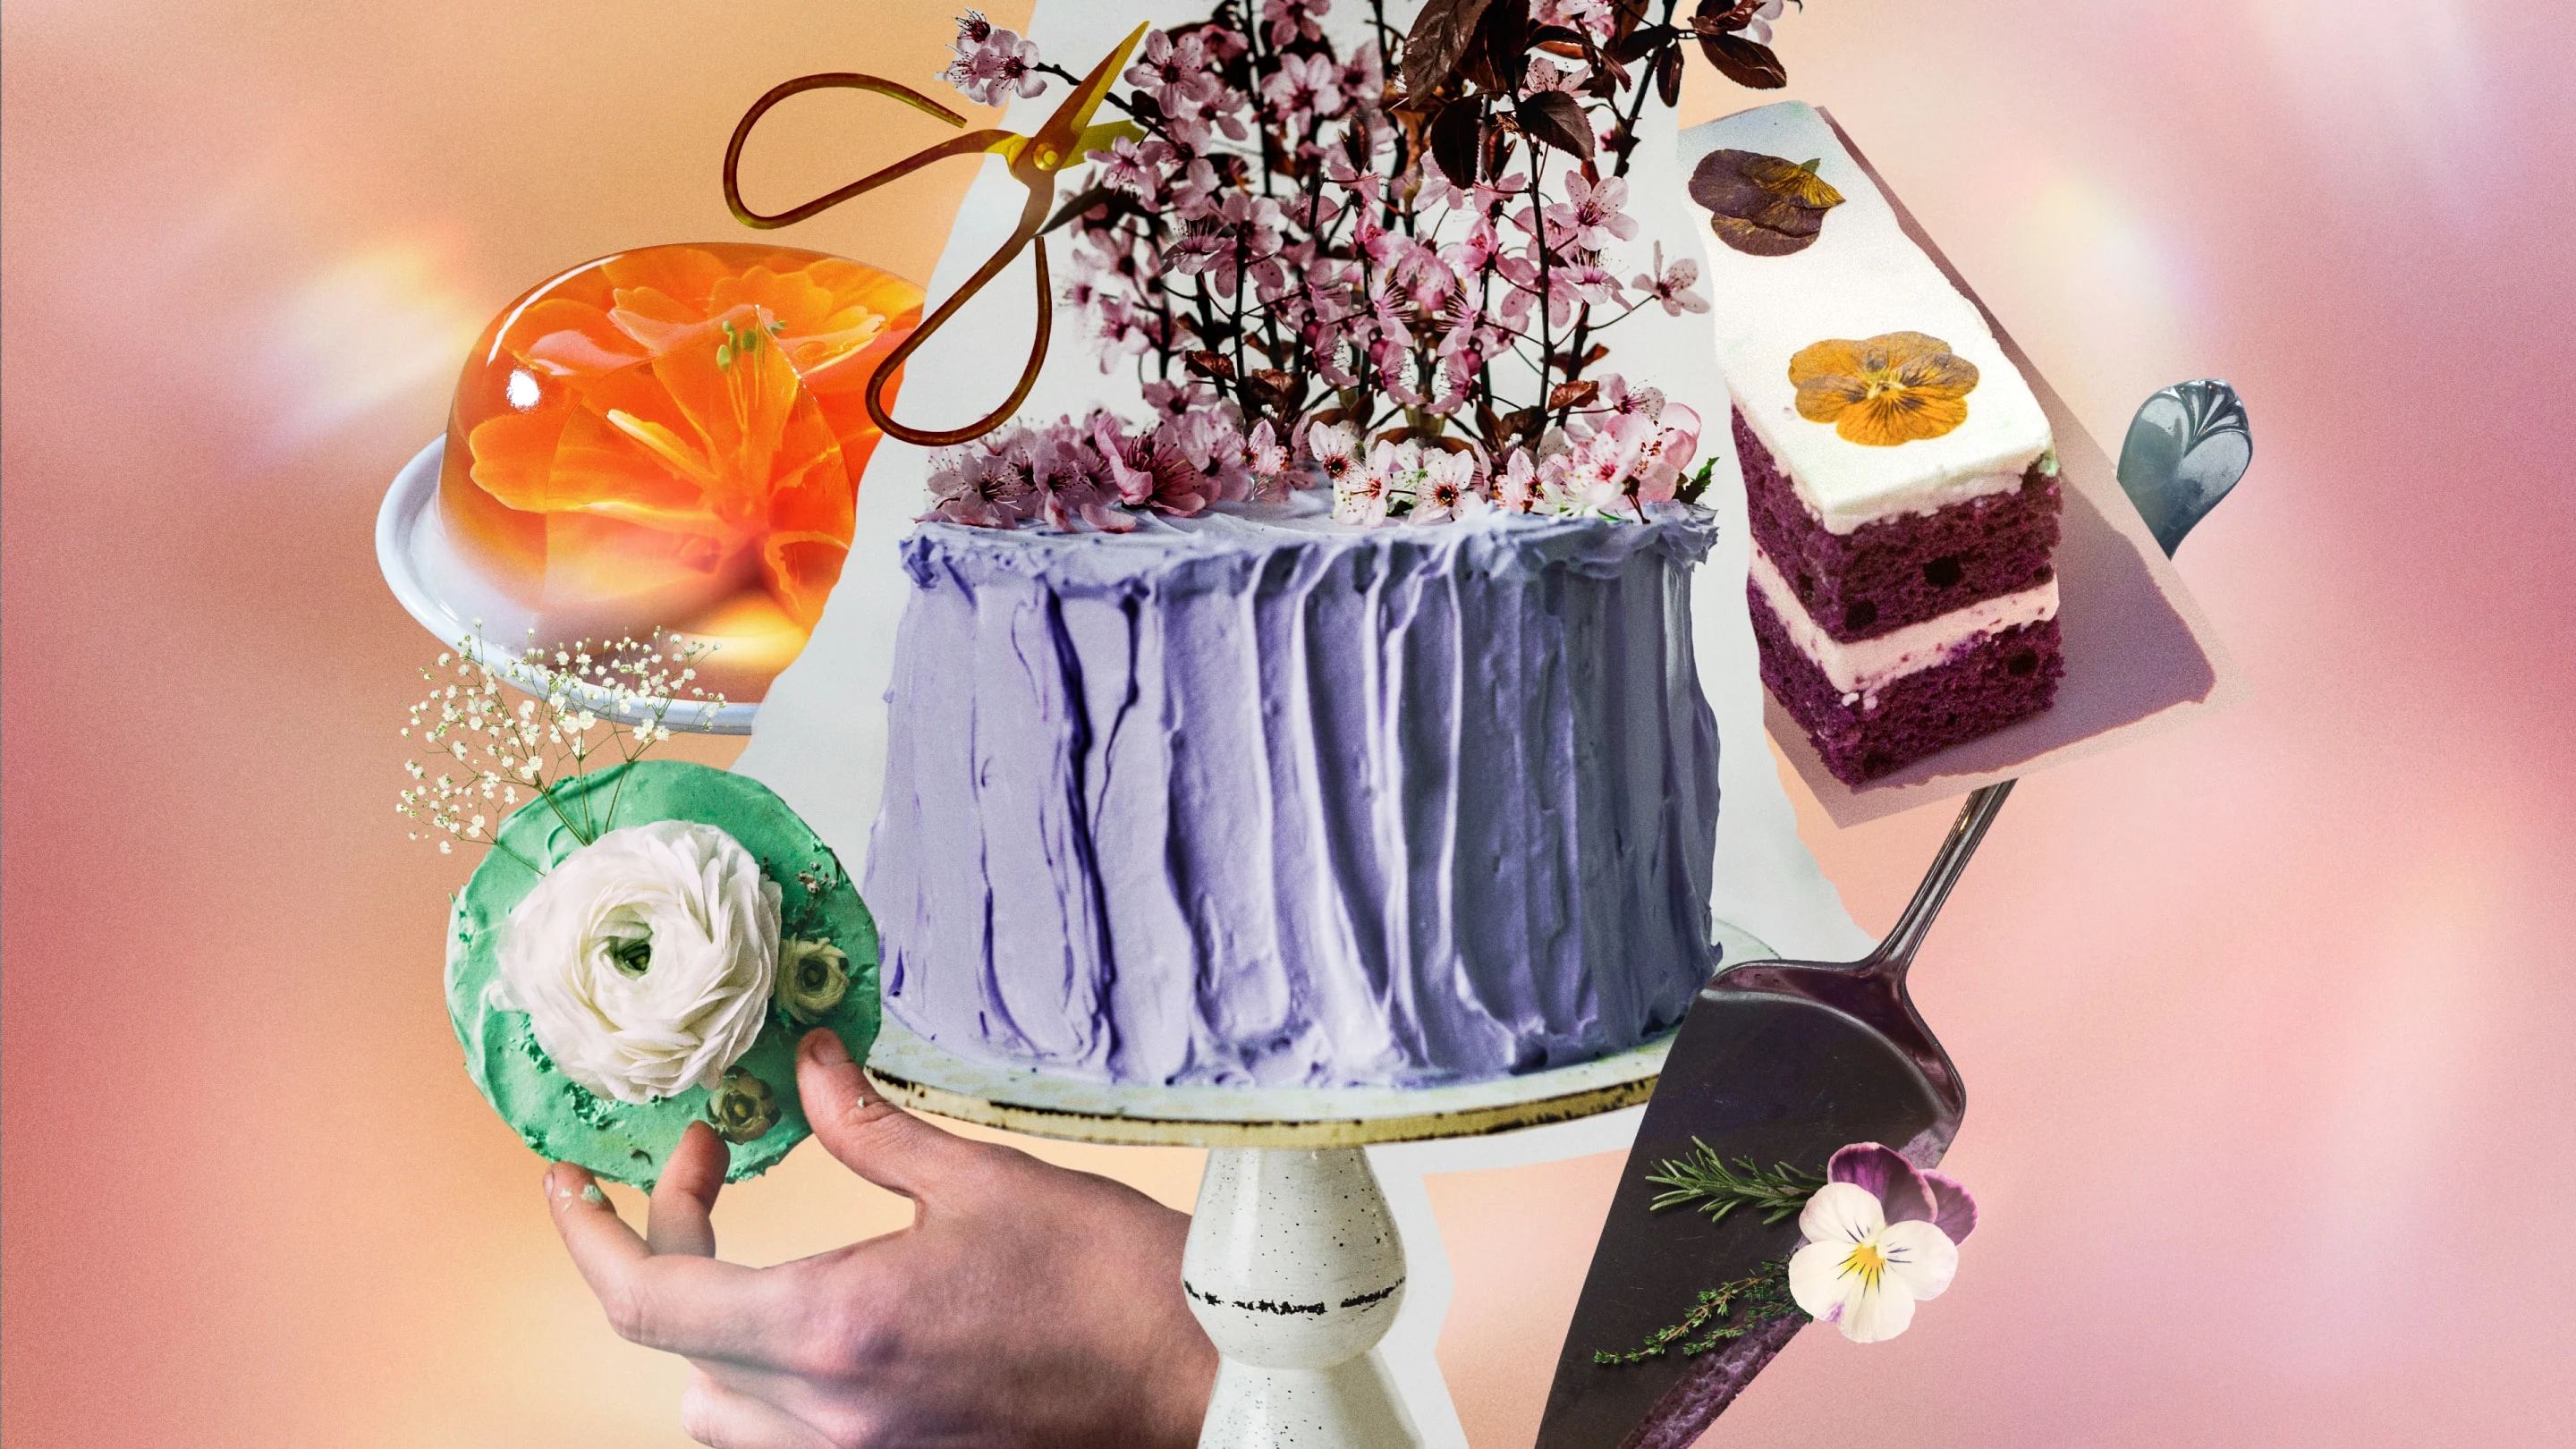 An assortment of cakes and cake slices featuring wild flowers adorned in various styles.